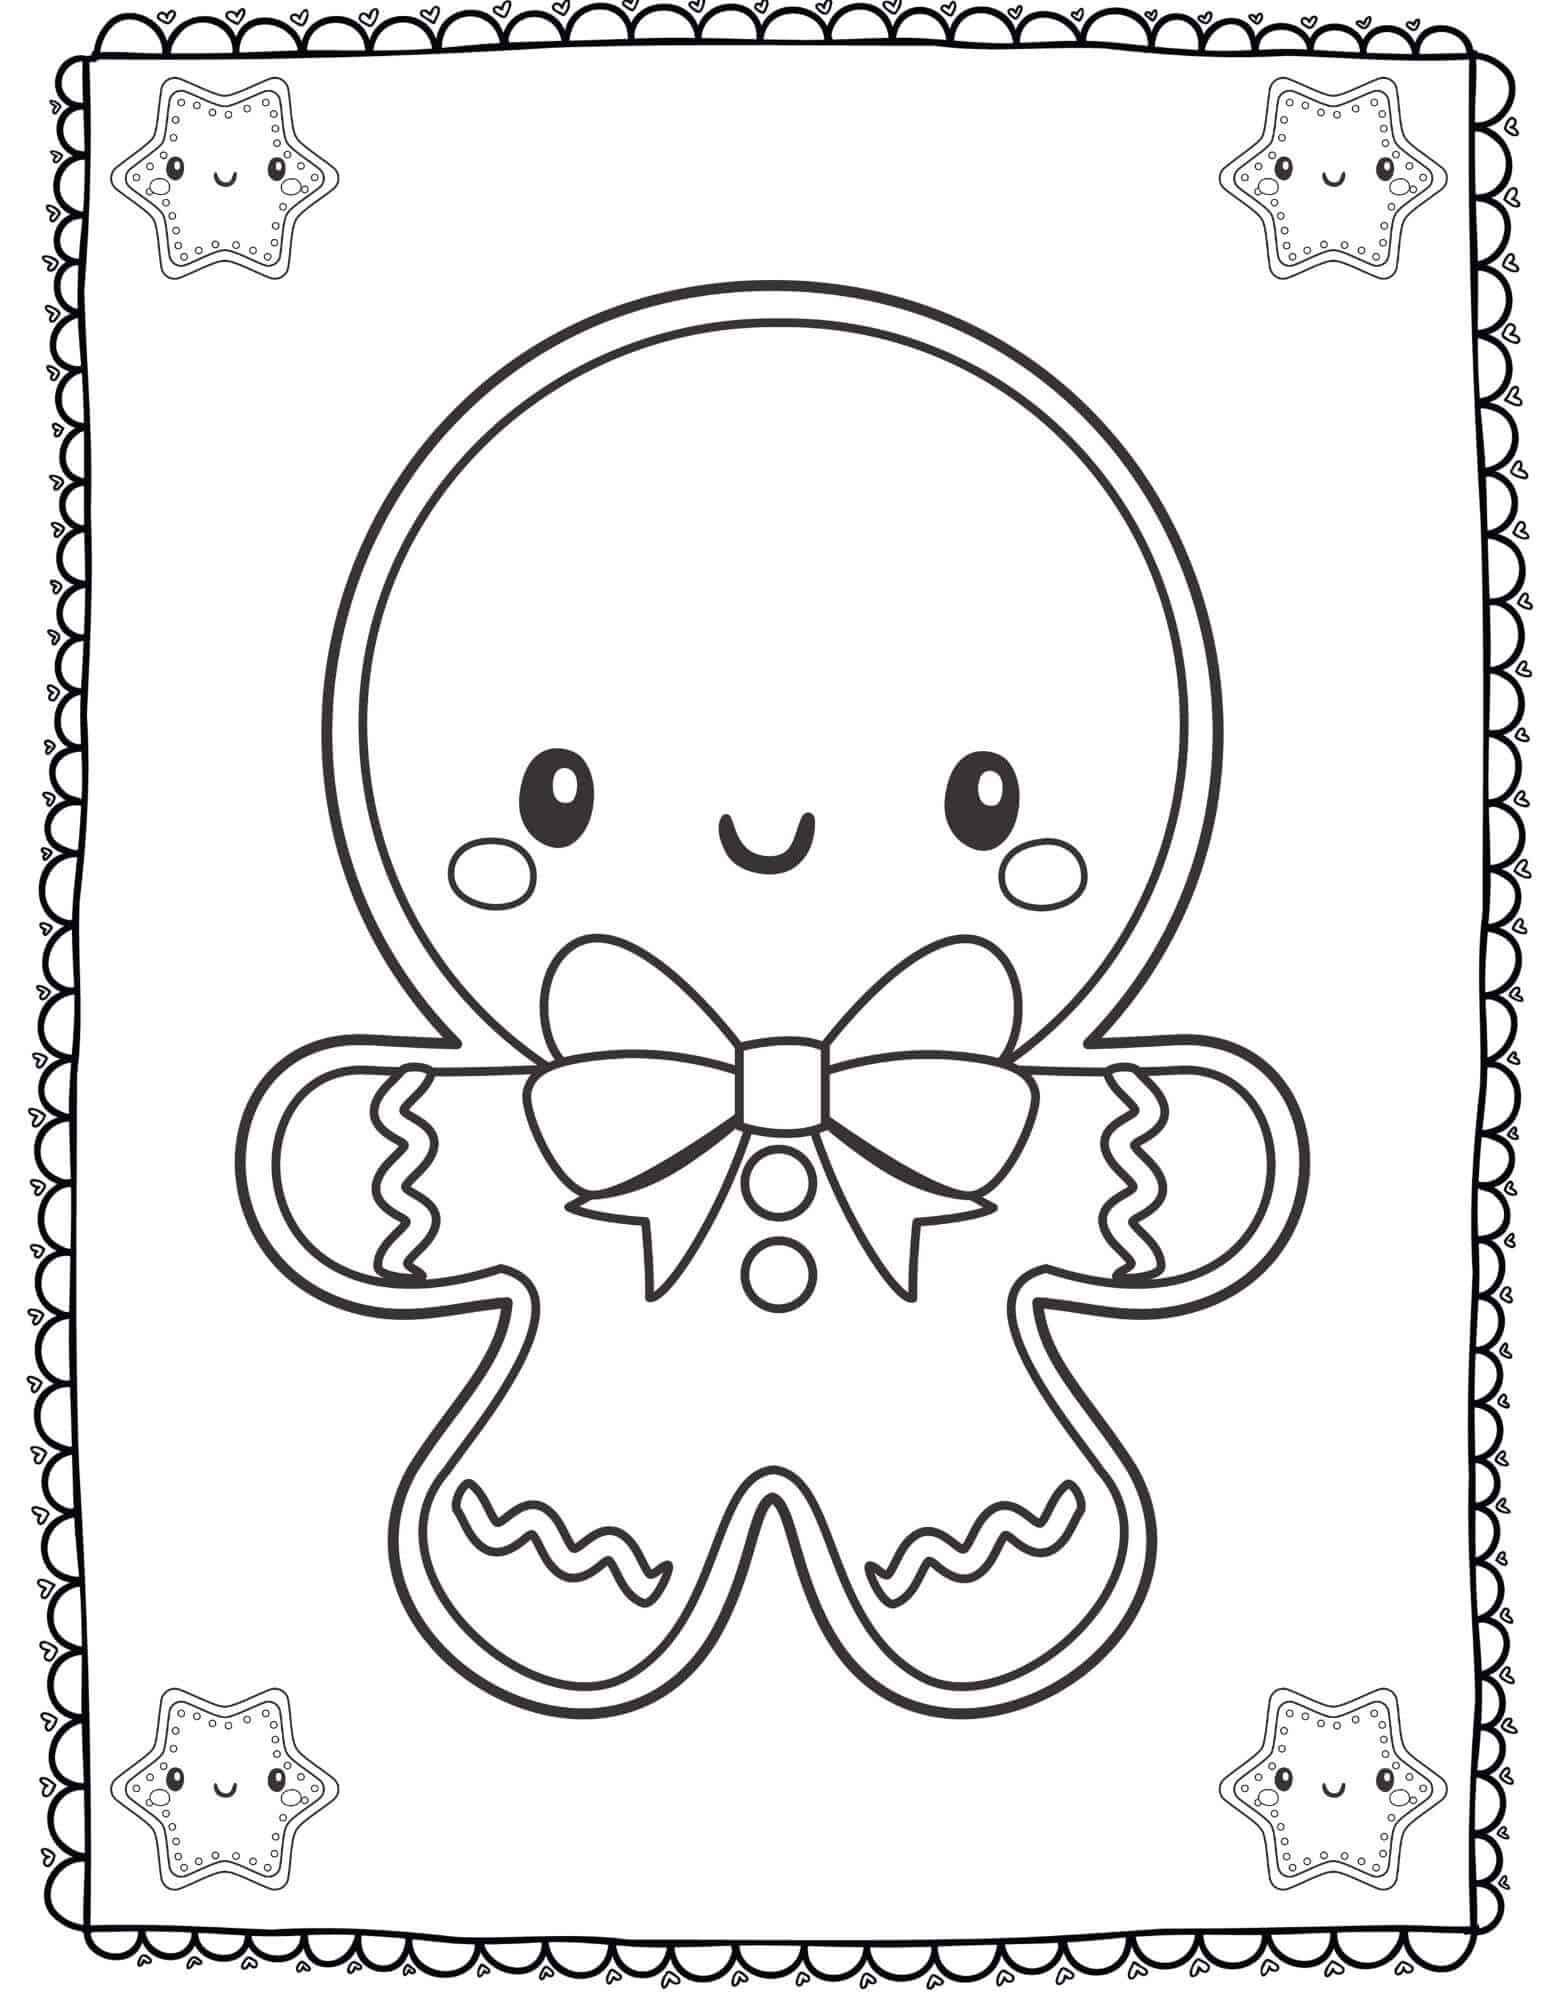 Free Printable Gingerbread Man Coloring Page - Instant PDF Download